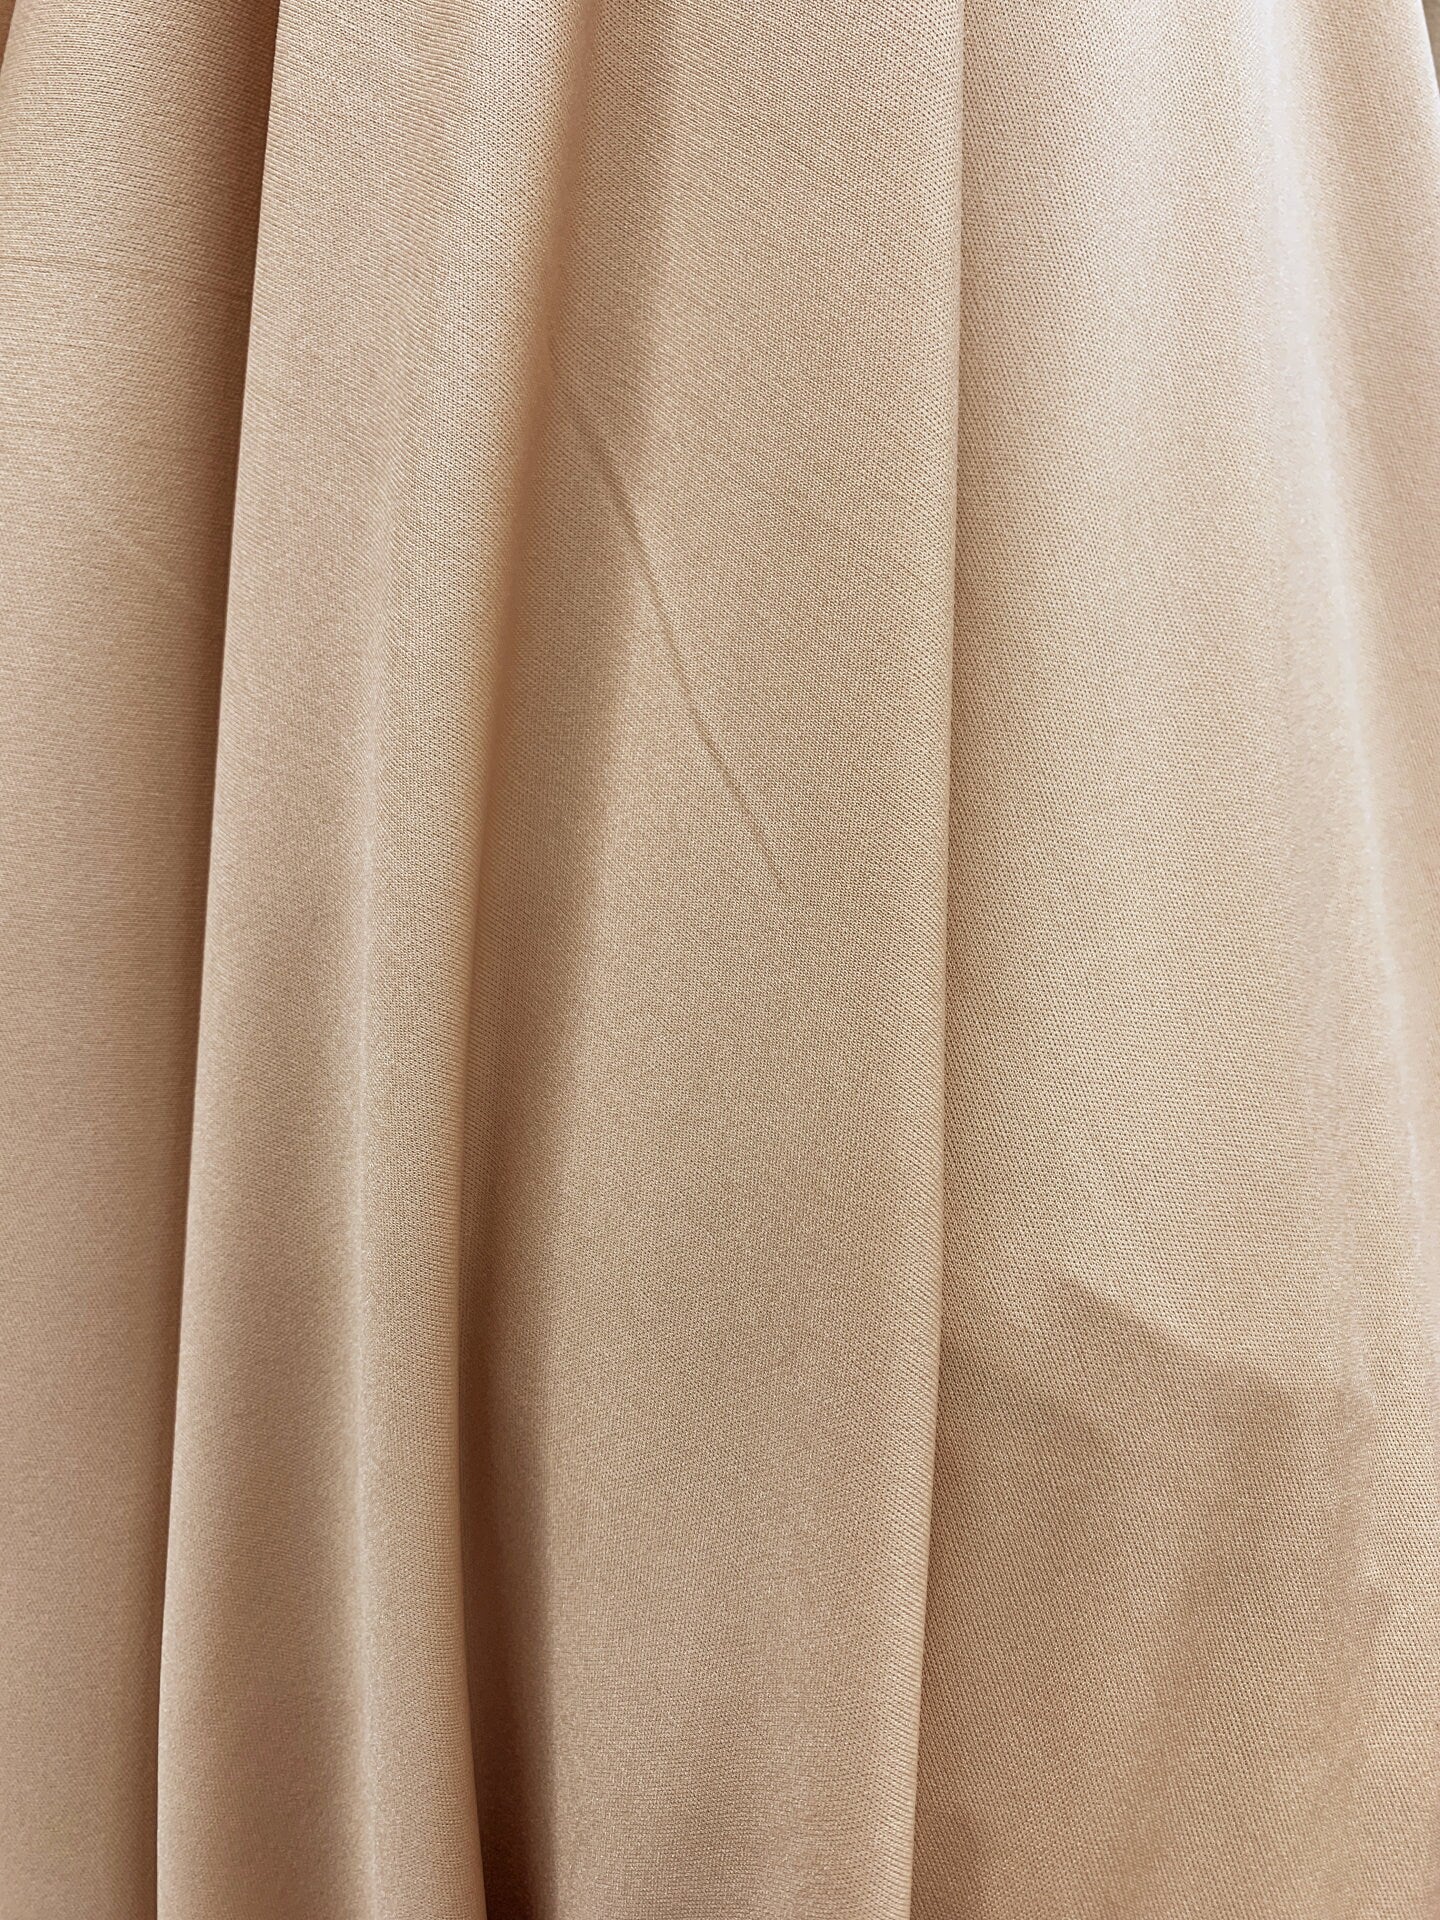 NUDE Stretch Lining Fabric (60 in.) Sold By The Yard